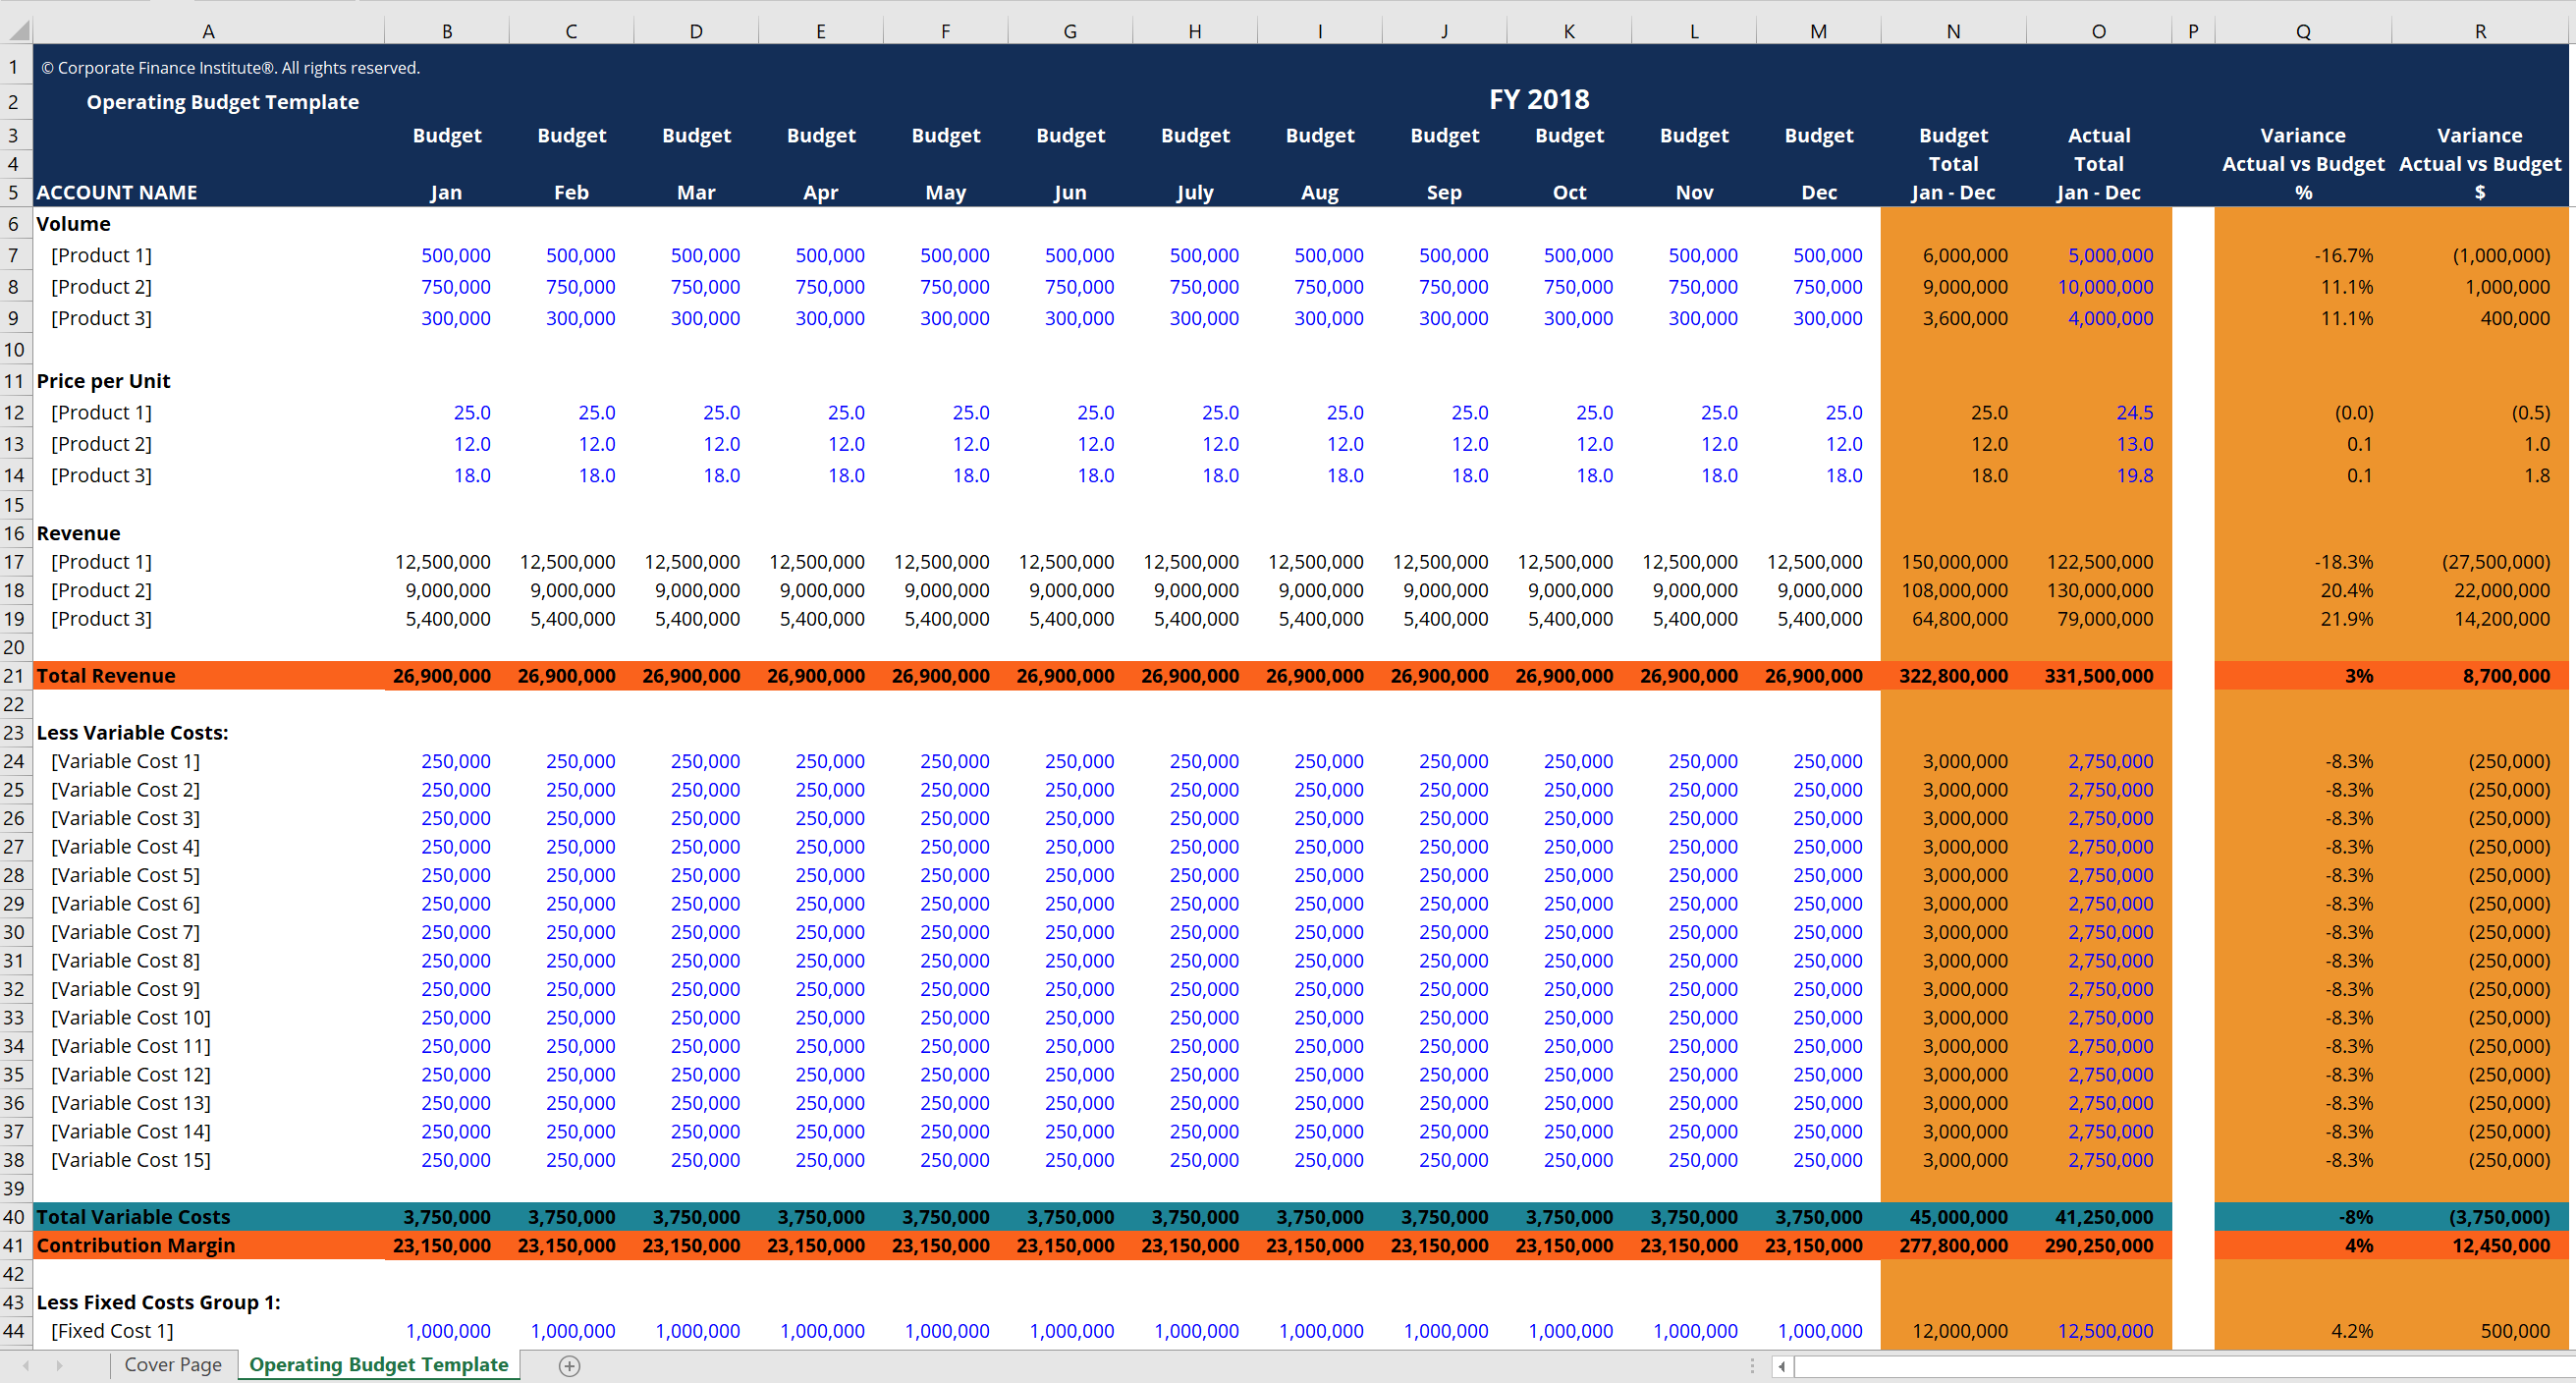 Operating Budget Excel Template   CFI Marketplace